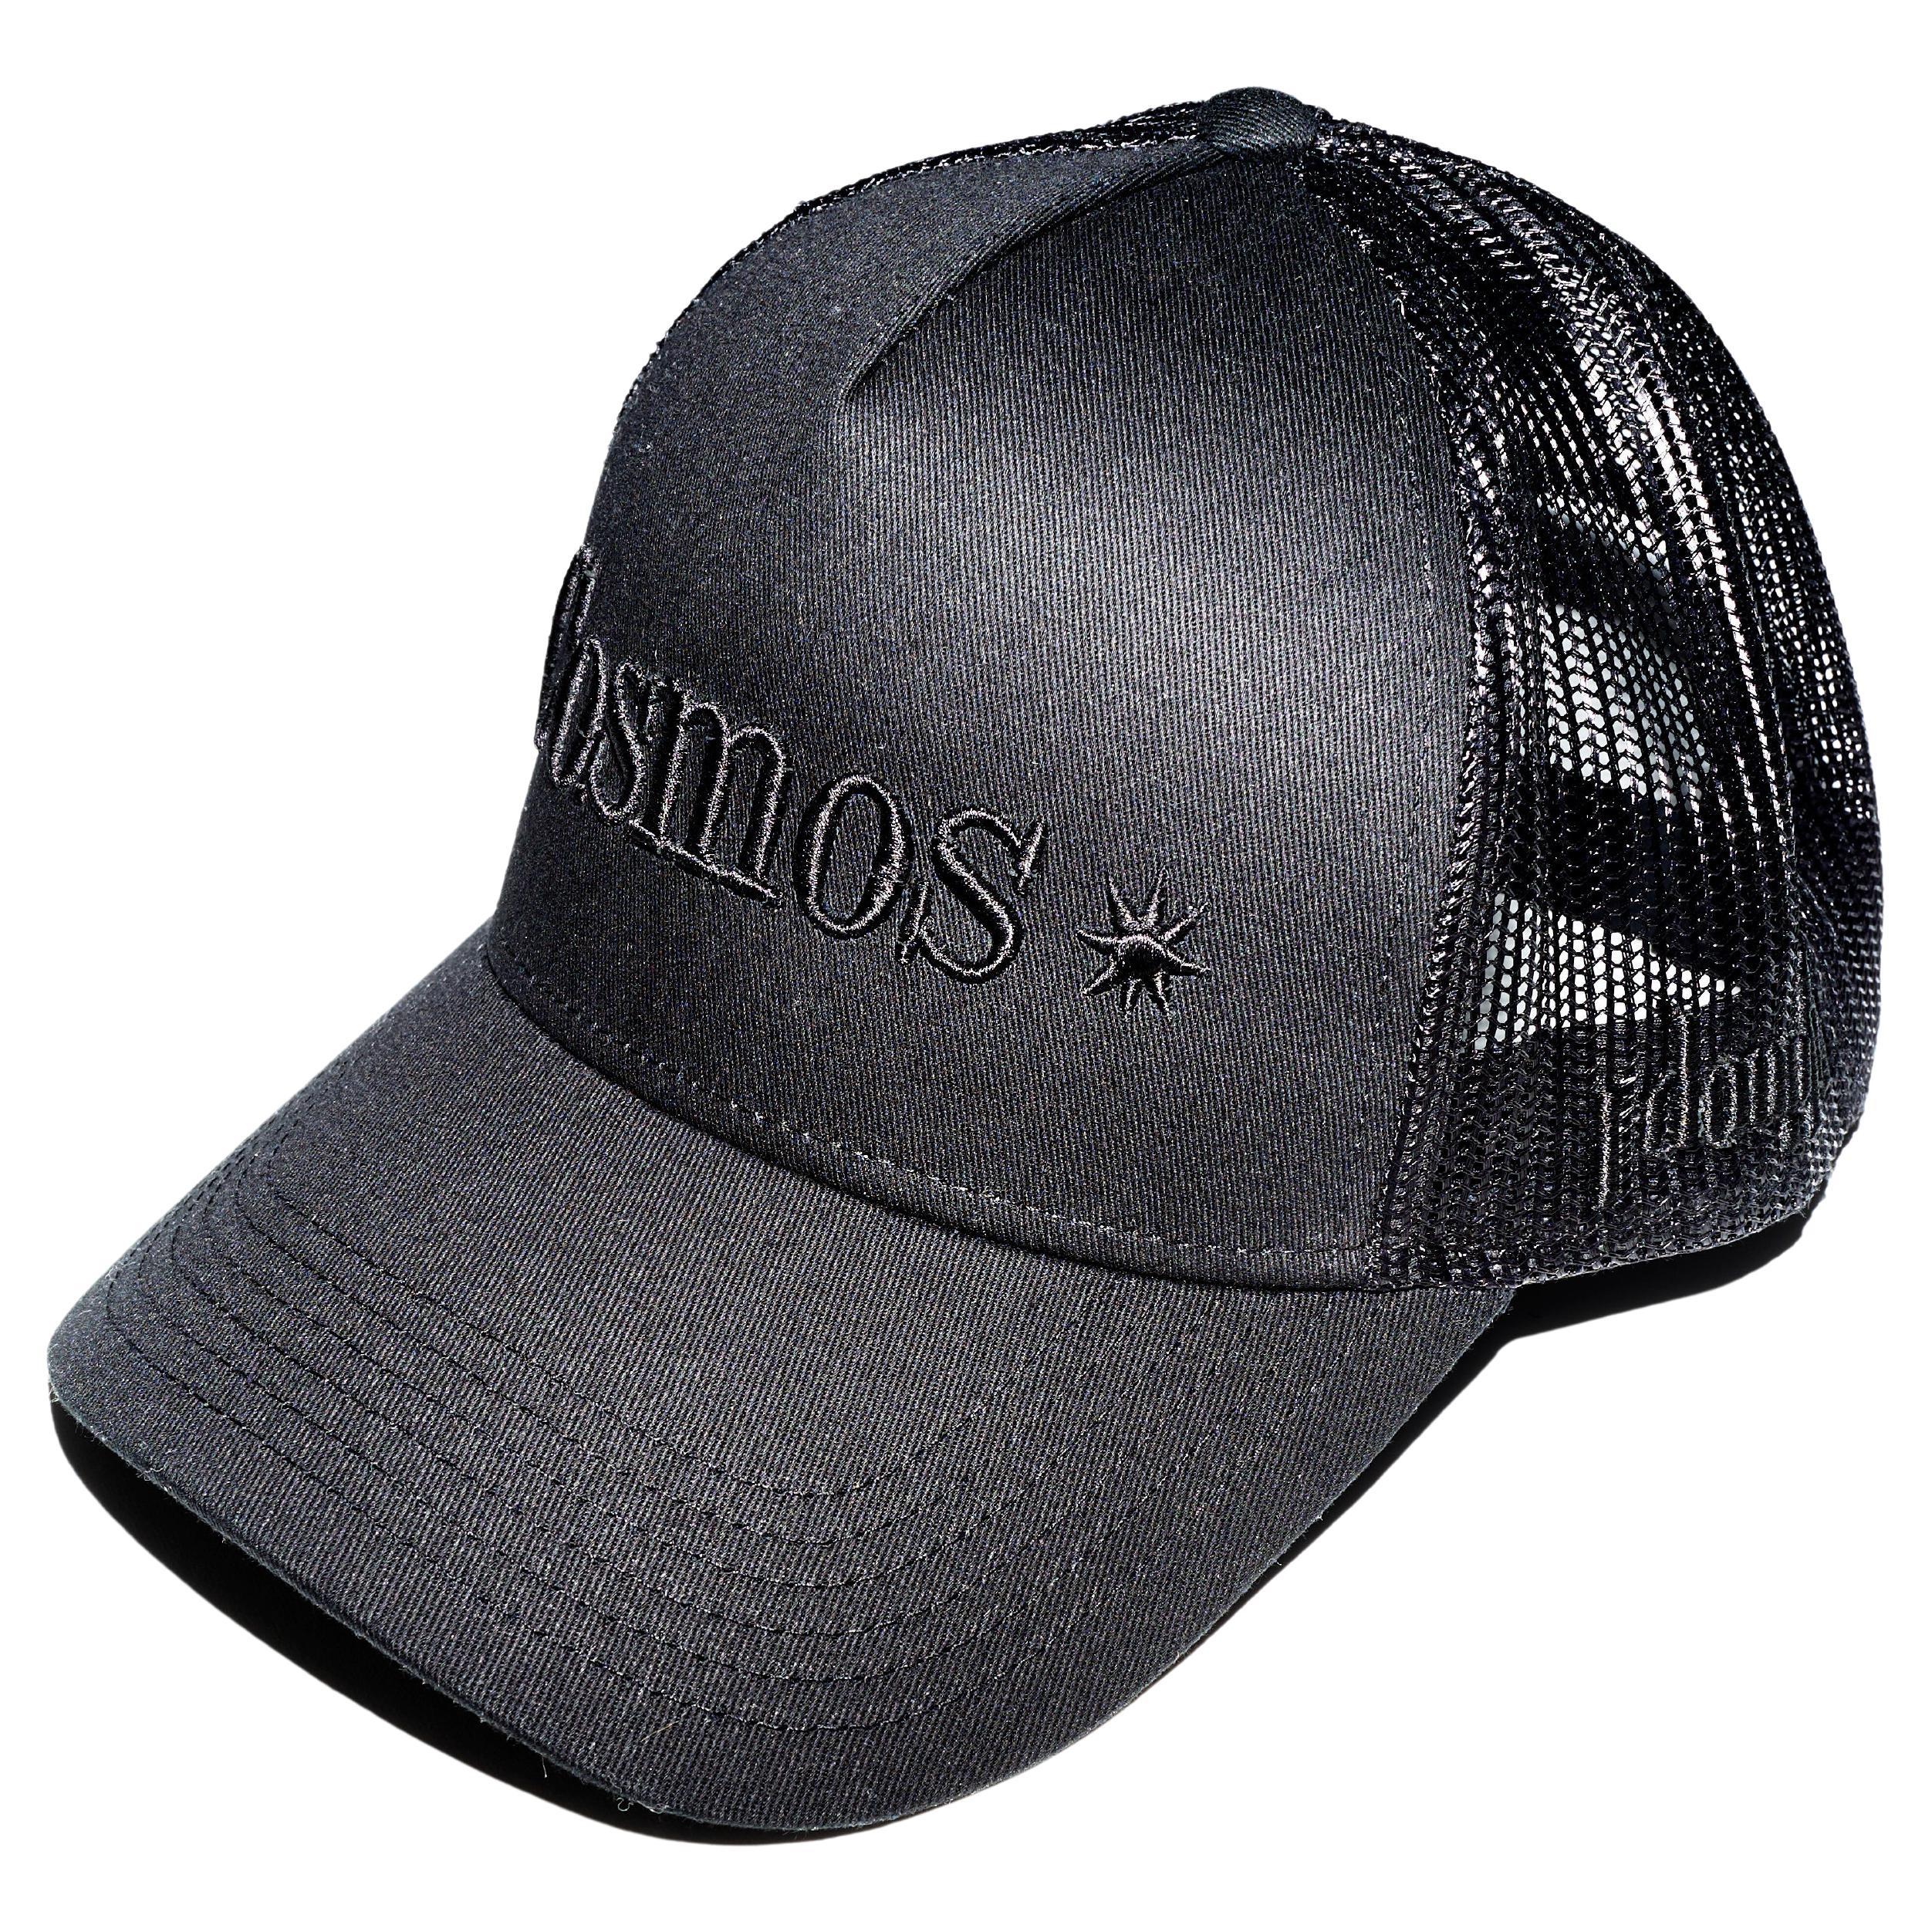 Hat Trucker Black Cosmos Embroidery J Dauphin
Brand: J Dauphin


J Dauphin was created 2006 by Swedish French Johanna Dauphin. She started her career working for LVMH owned Fend at the Italian head office in Rome. She later moved to Paris and J